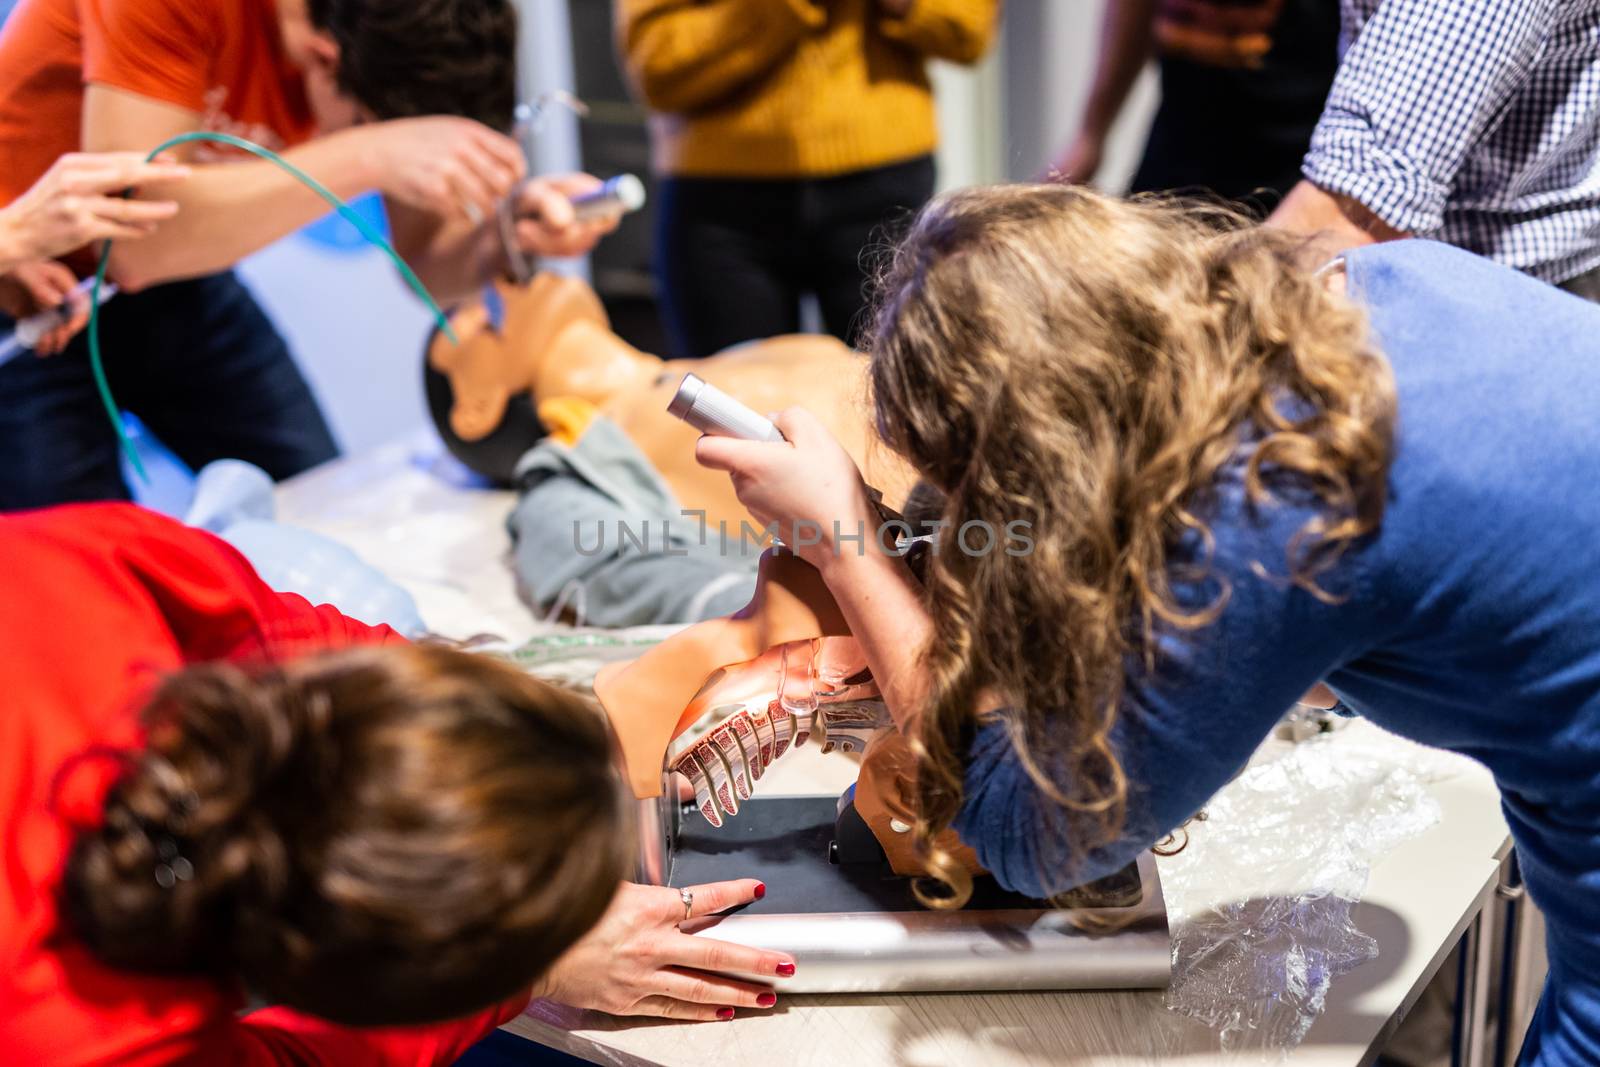 Medical doctor expert instructor displaying method of patient intubation on medical education training and workshop. Participants working in teams learning new medical procedures and techniques.